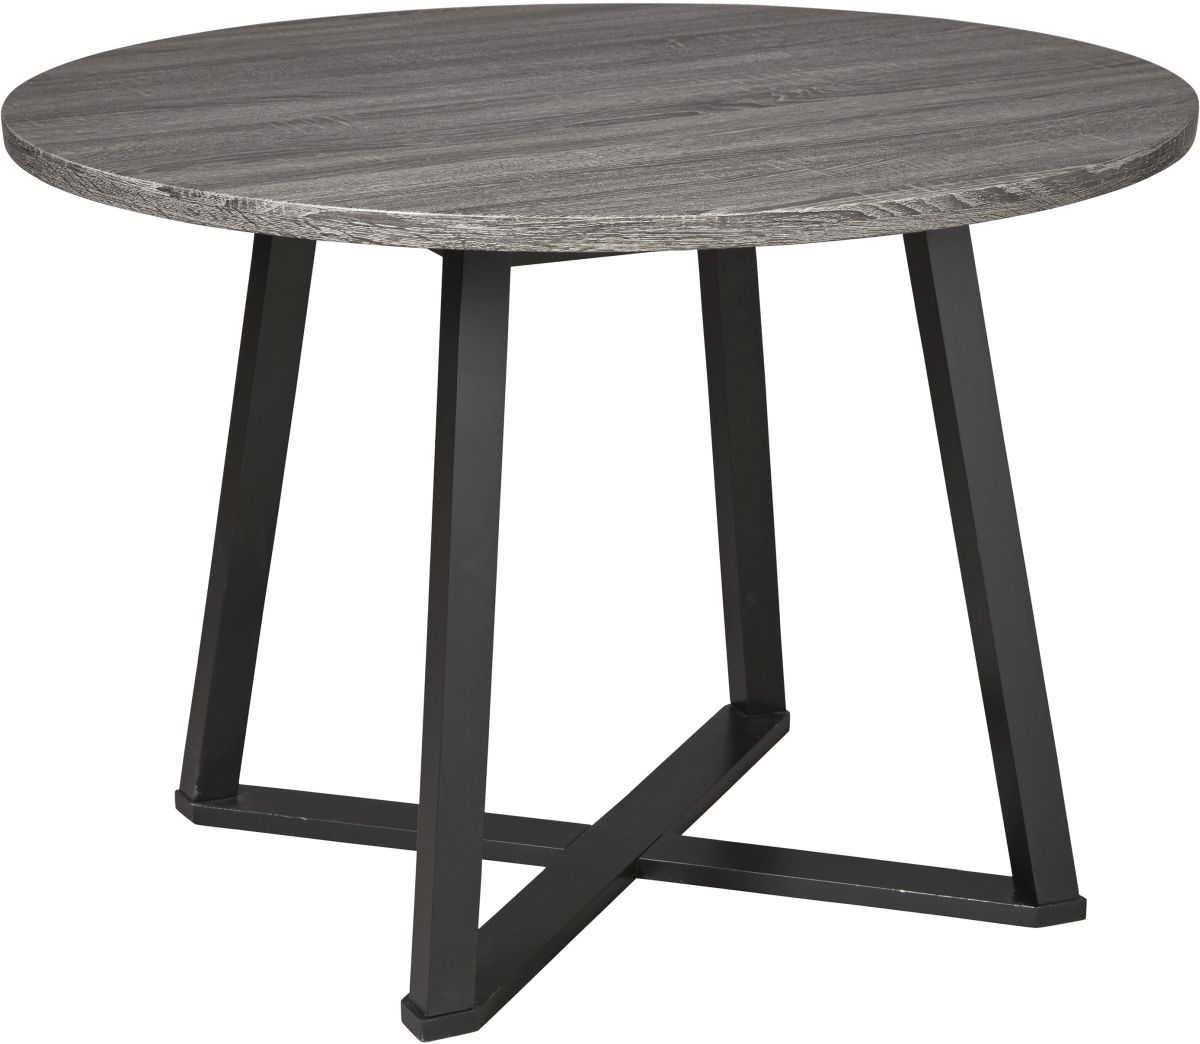 Signature Design by Ashley® Centiar Gray/Black Round Dining Room Table